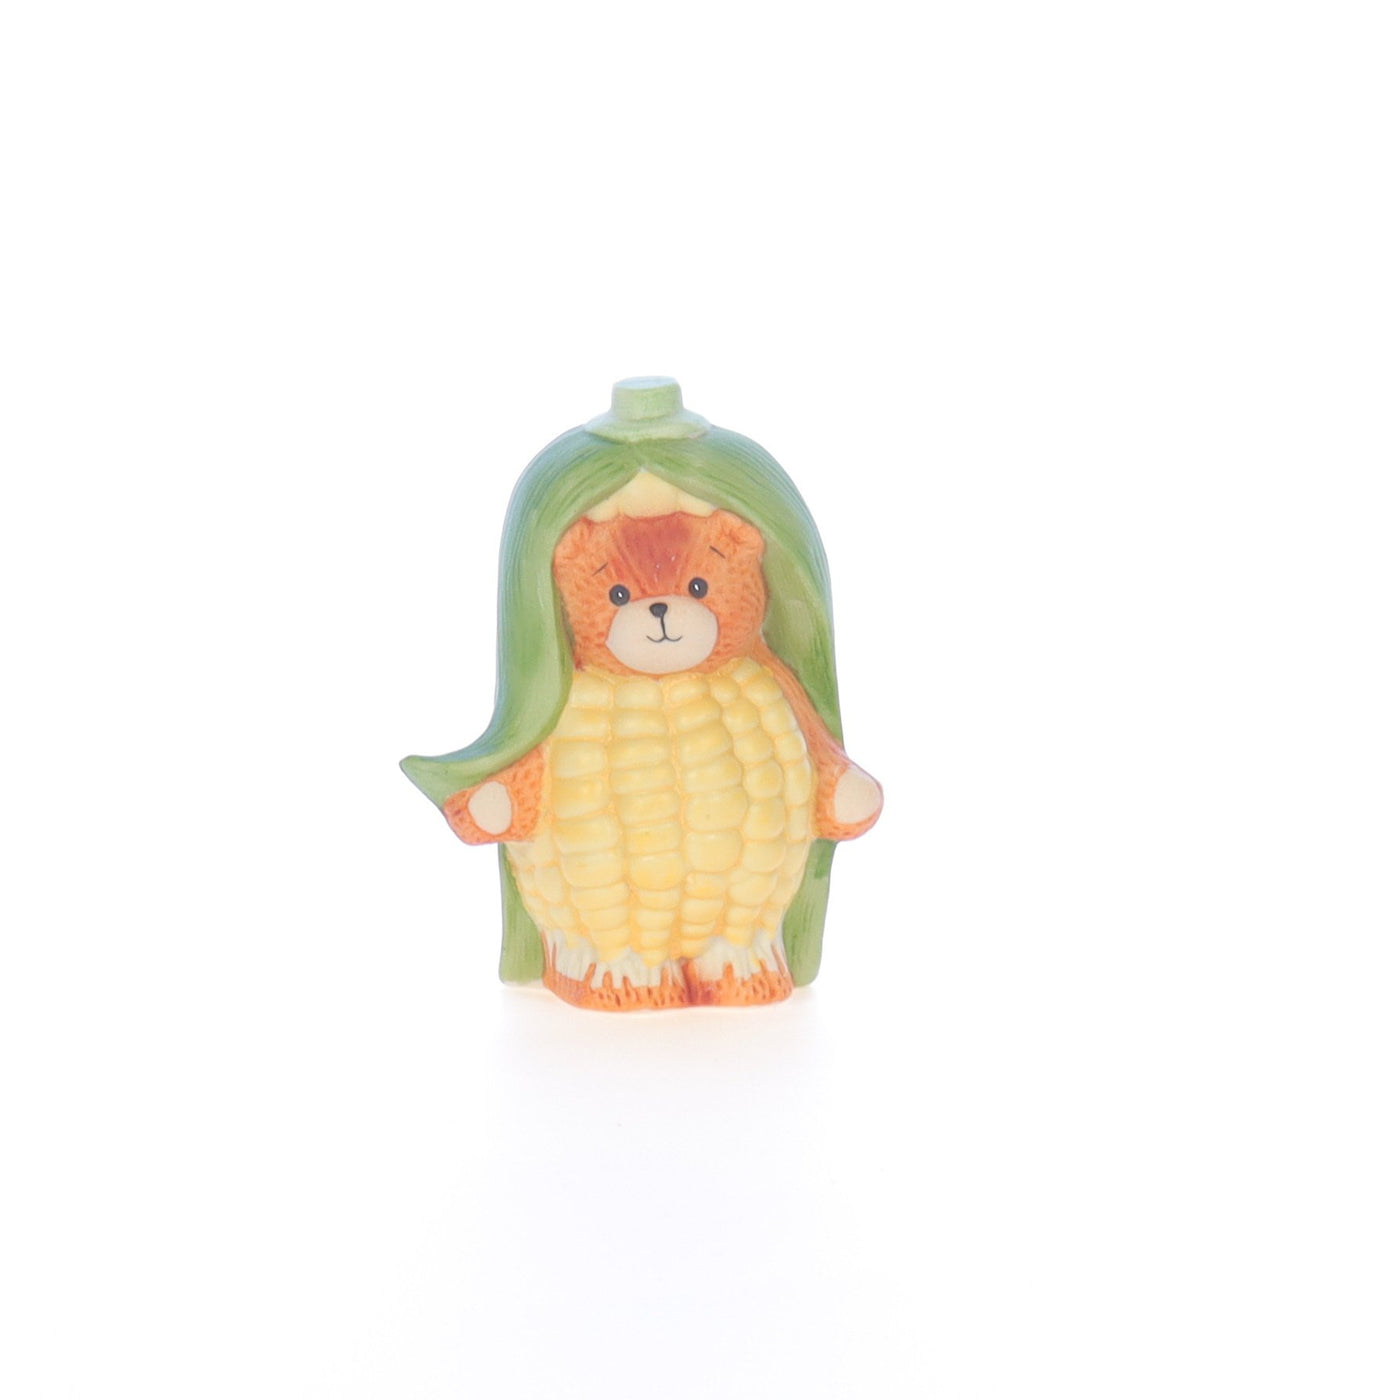 Lucy_And_Me_by_Lucy_Atwell_Porcelain_Figurine_Bear_with_Corn_Costume_Lucy_Unknown_077_01